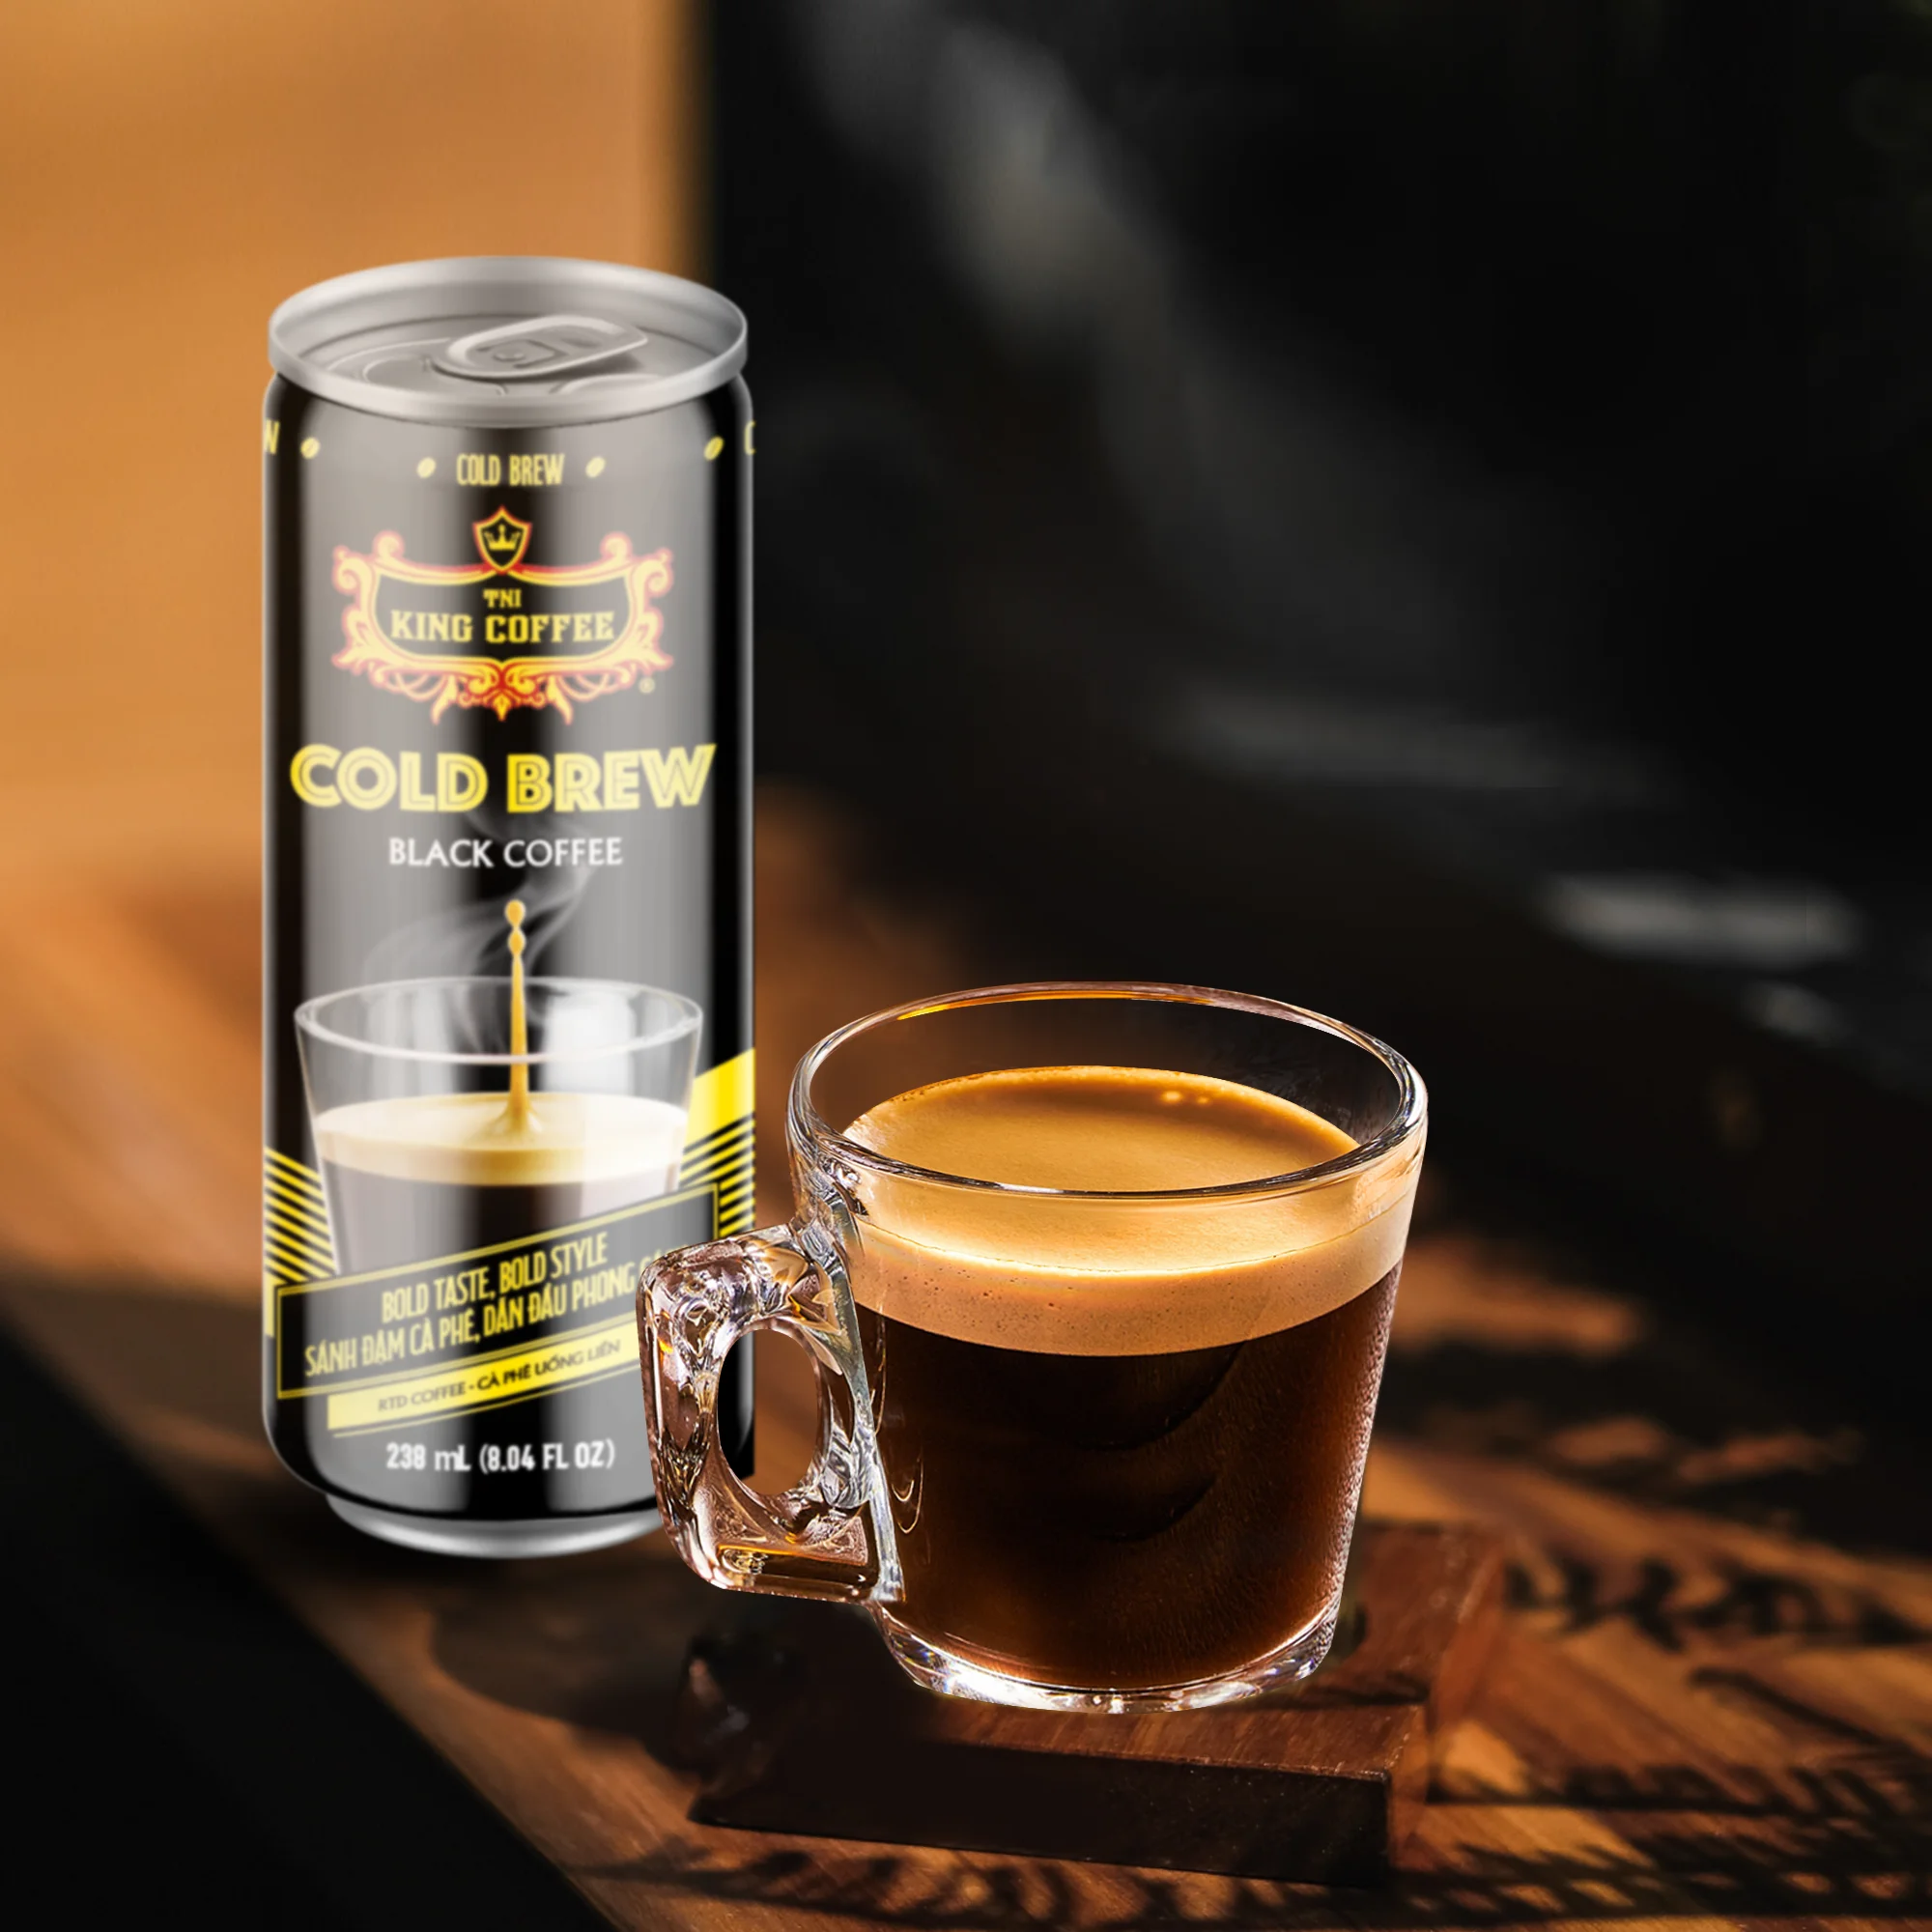 KING COFFEE - (RTD) Cold Brew Black Coffee Can 238 ml packed in 24 can per box from Top Vietnamese Coffee Brand